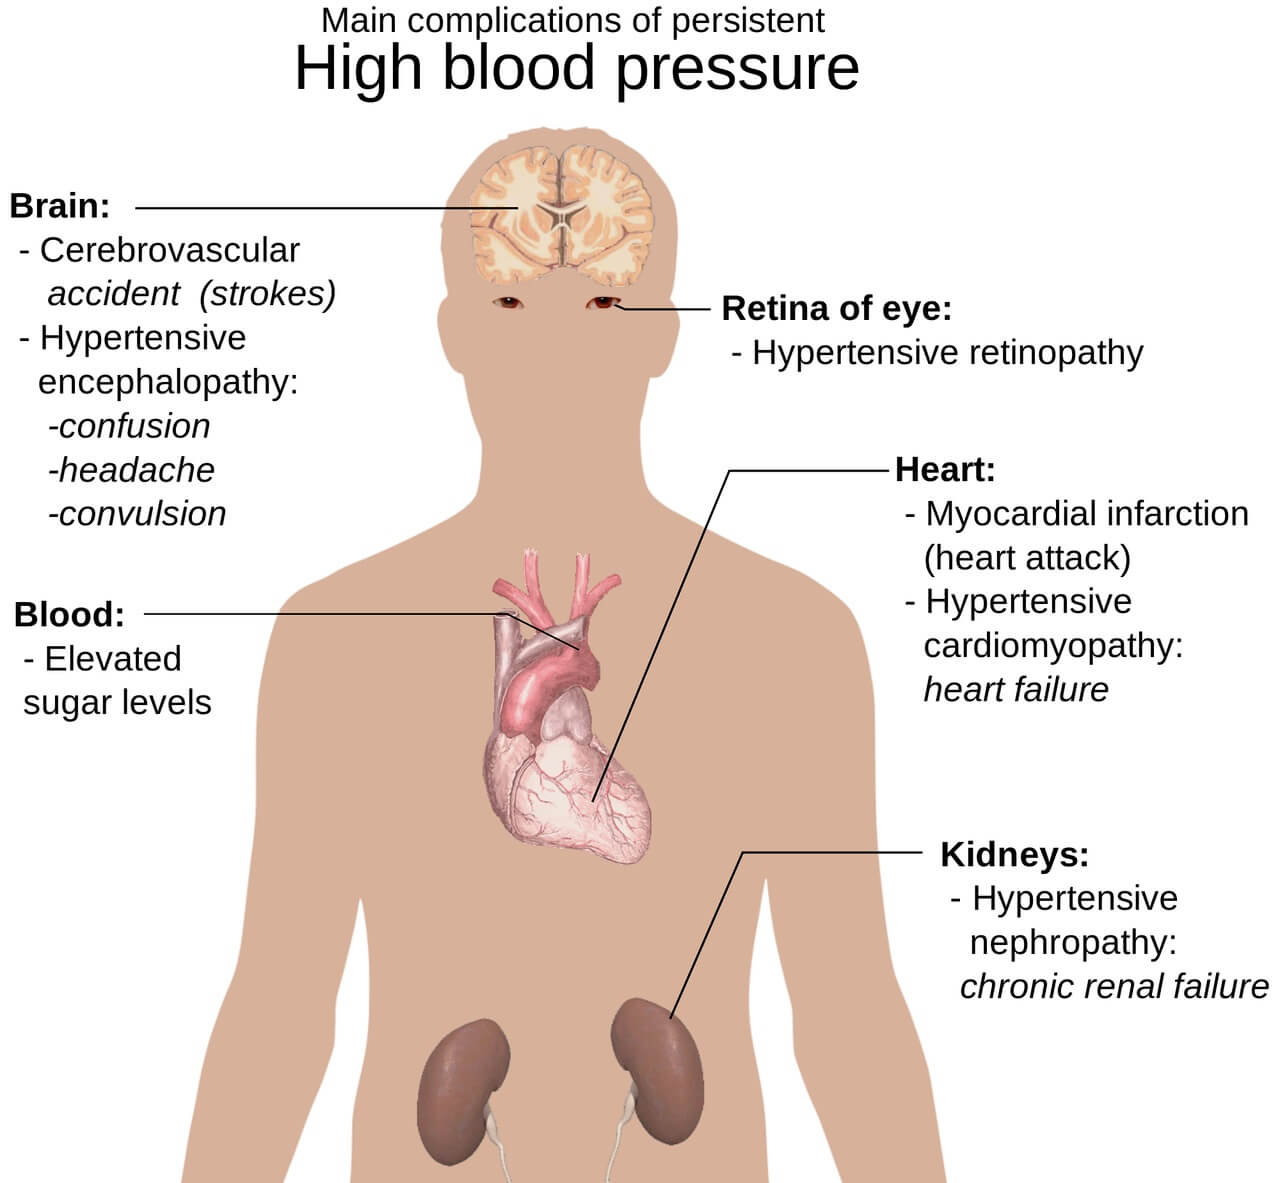 Recommended Foods for Patients with High Blood Pressure